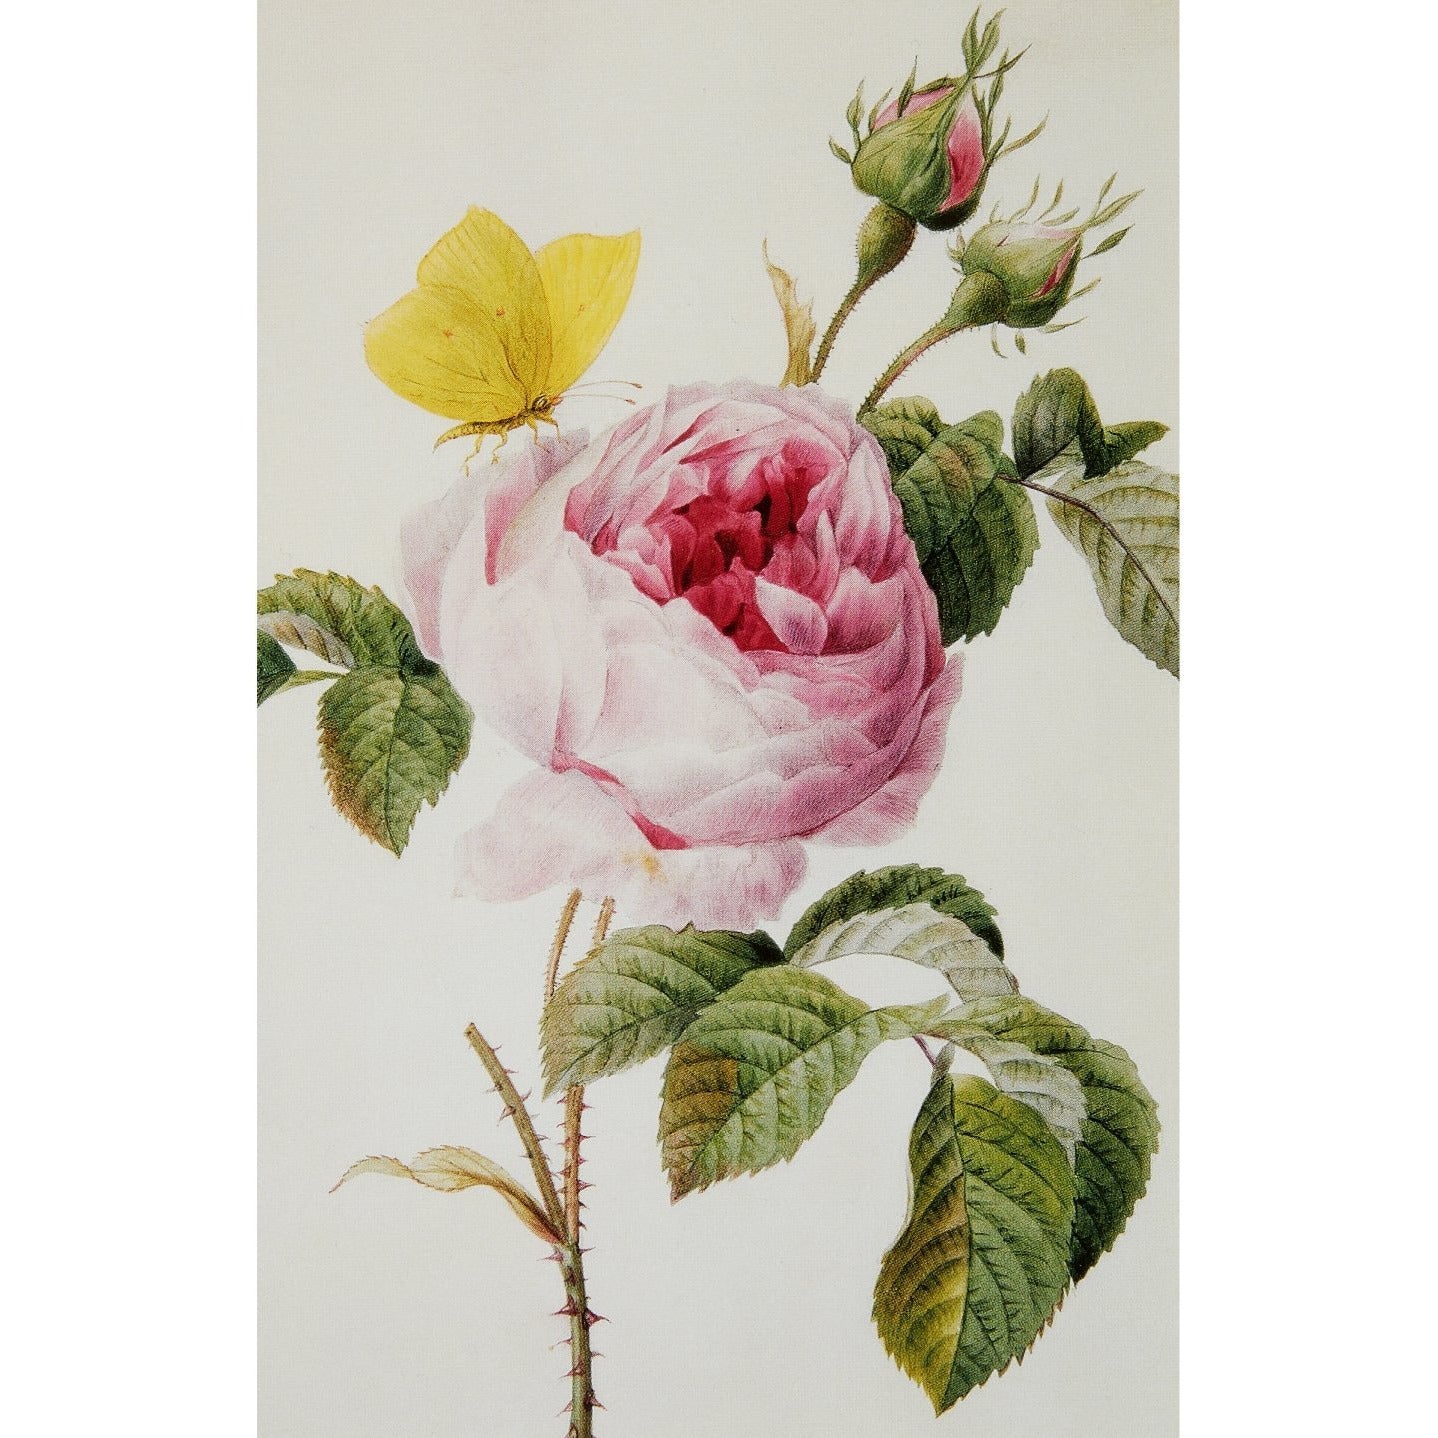 Notecard - Pink centifolia rose by Louise d'Orleans. From the Broughton Collection of the Fitzwilliam Museum, brought to you by CuratingCambridge.co.uk